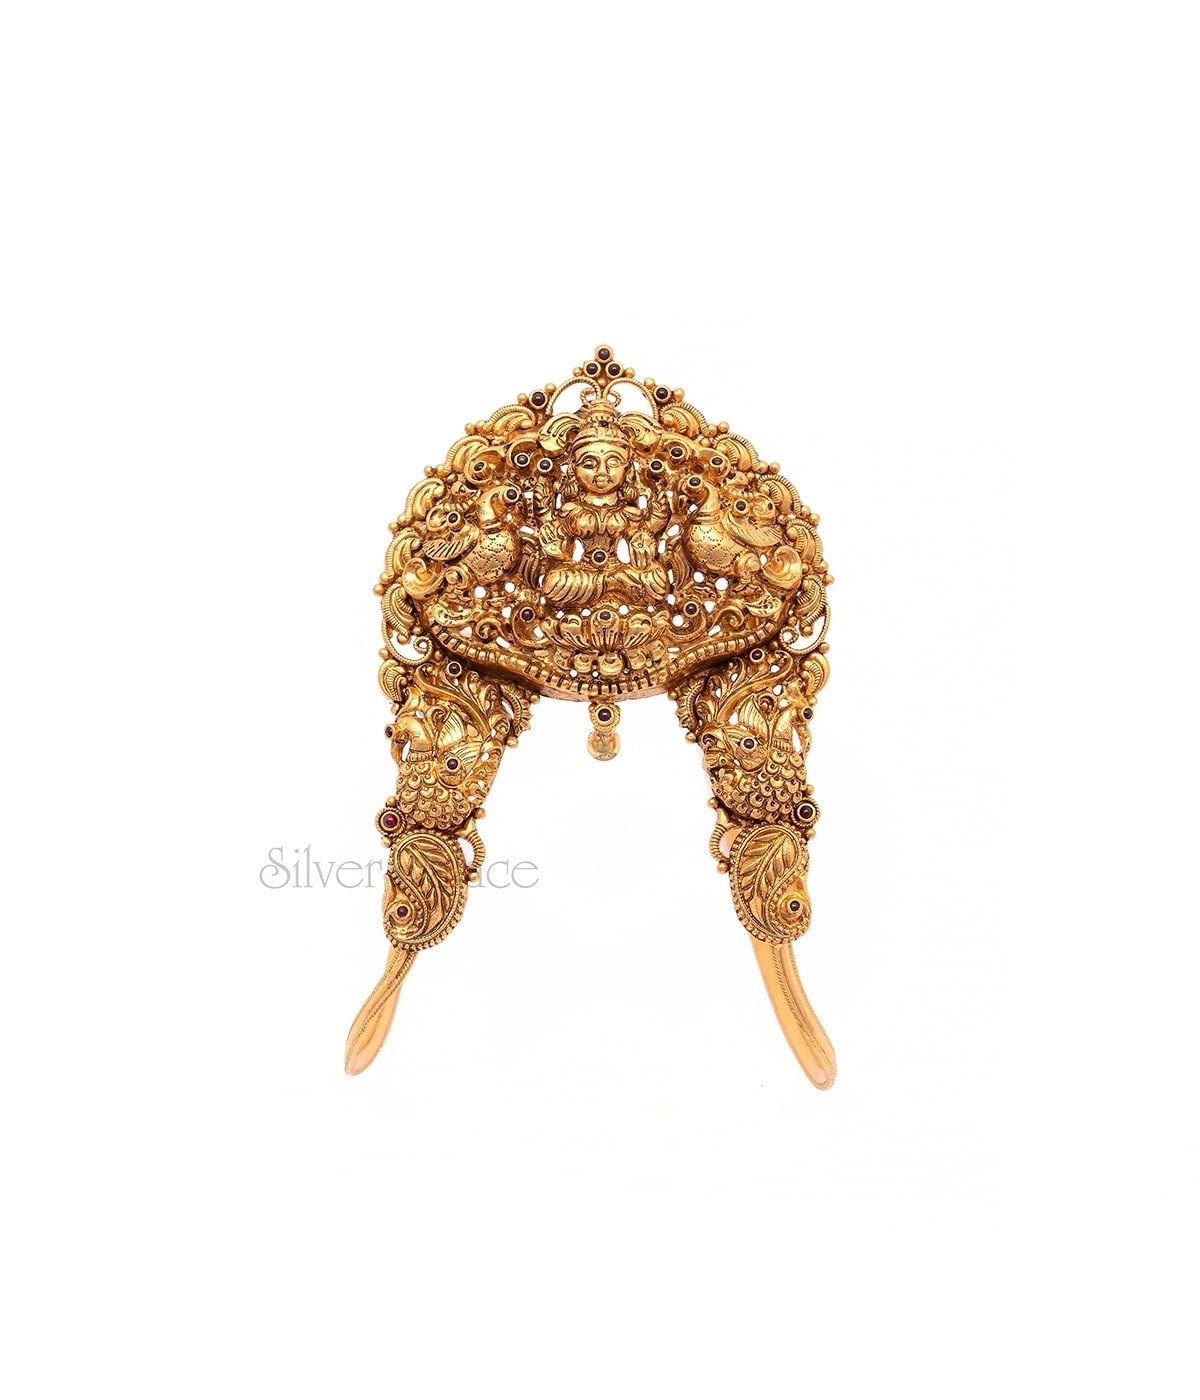 GOLD PLATED LAKSHMI PEACOCK DESIGN BAJUBAND WITH GOLD BEAD